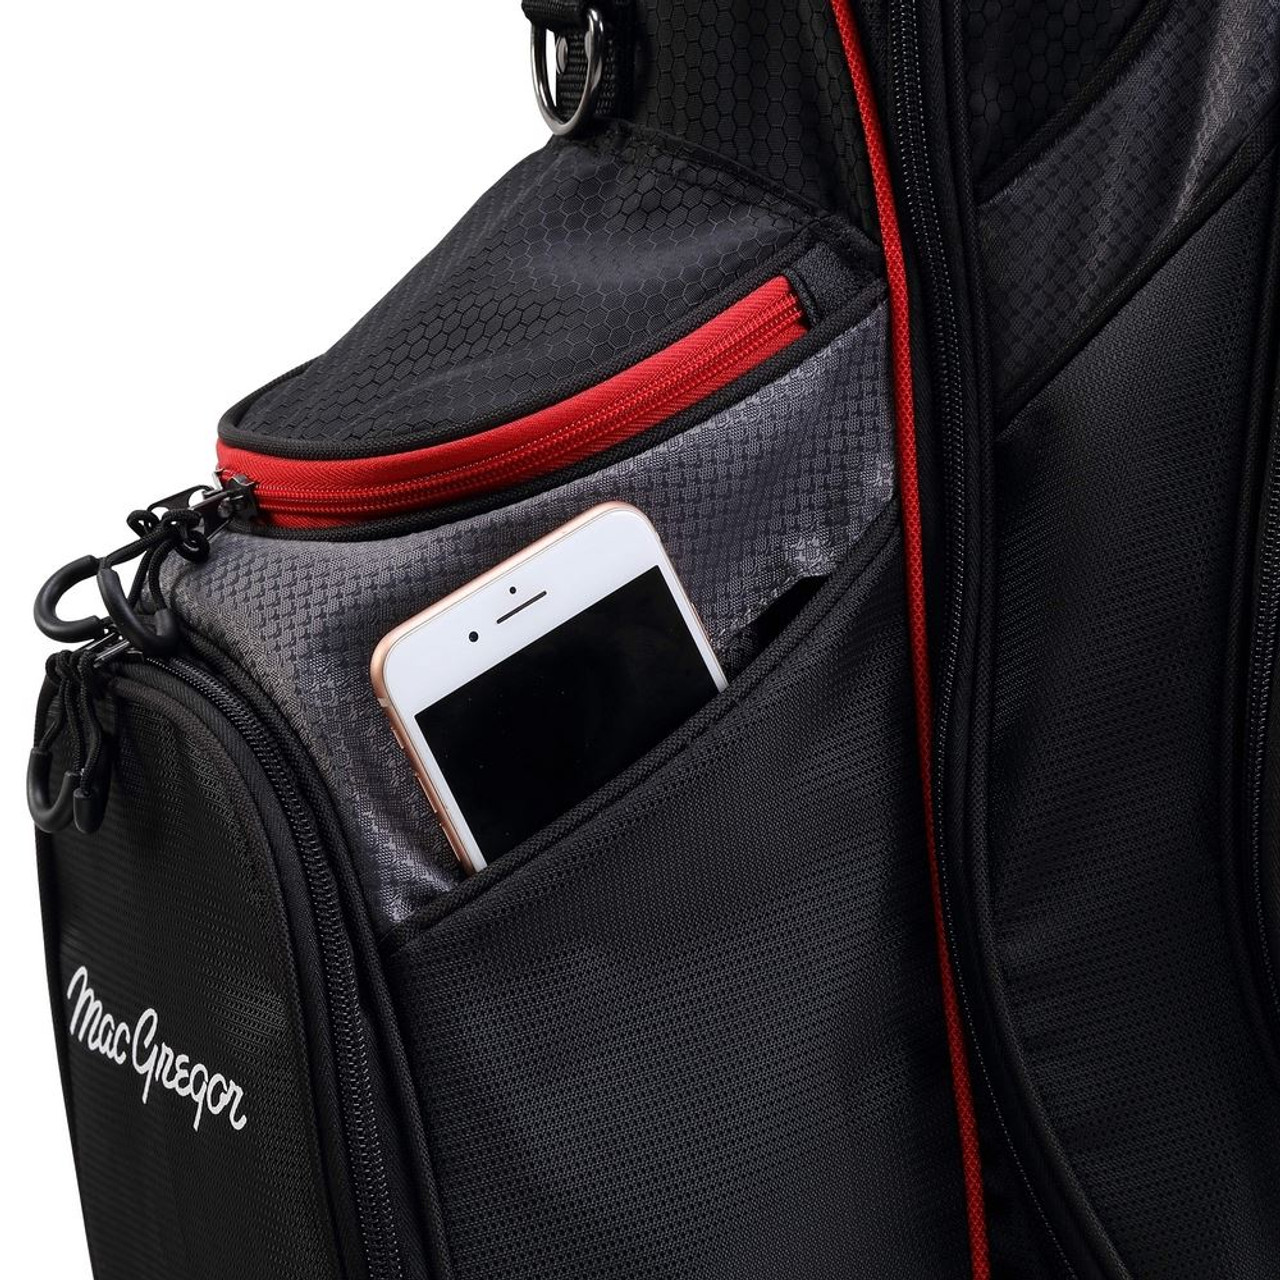 MacGregor Golf Response Stand Bag with 9